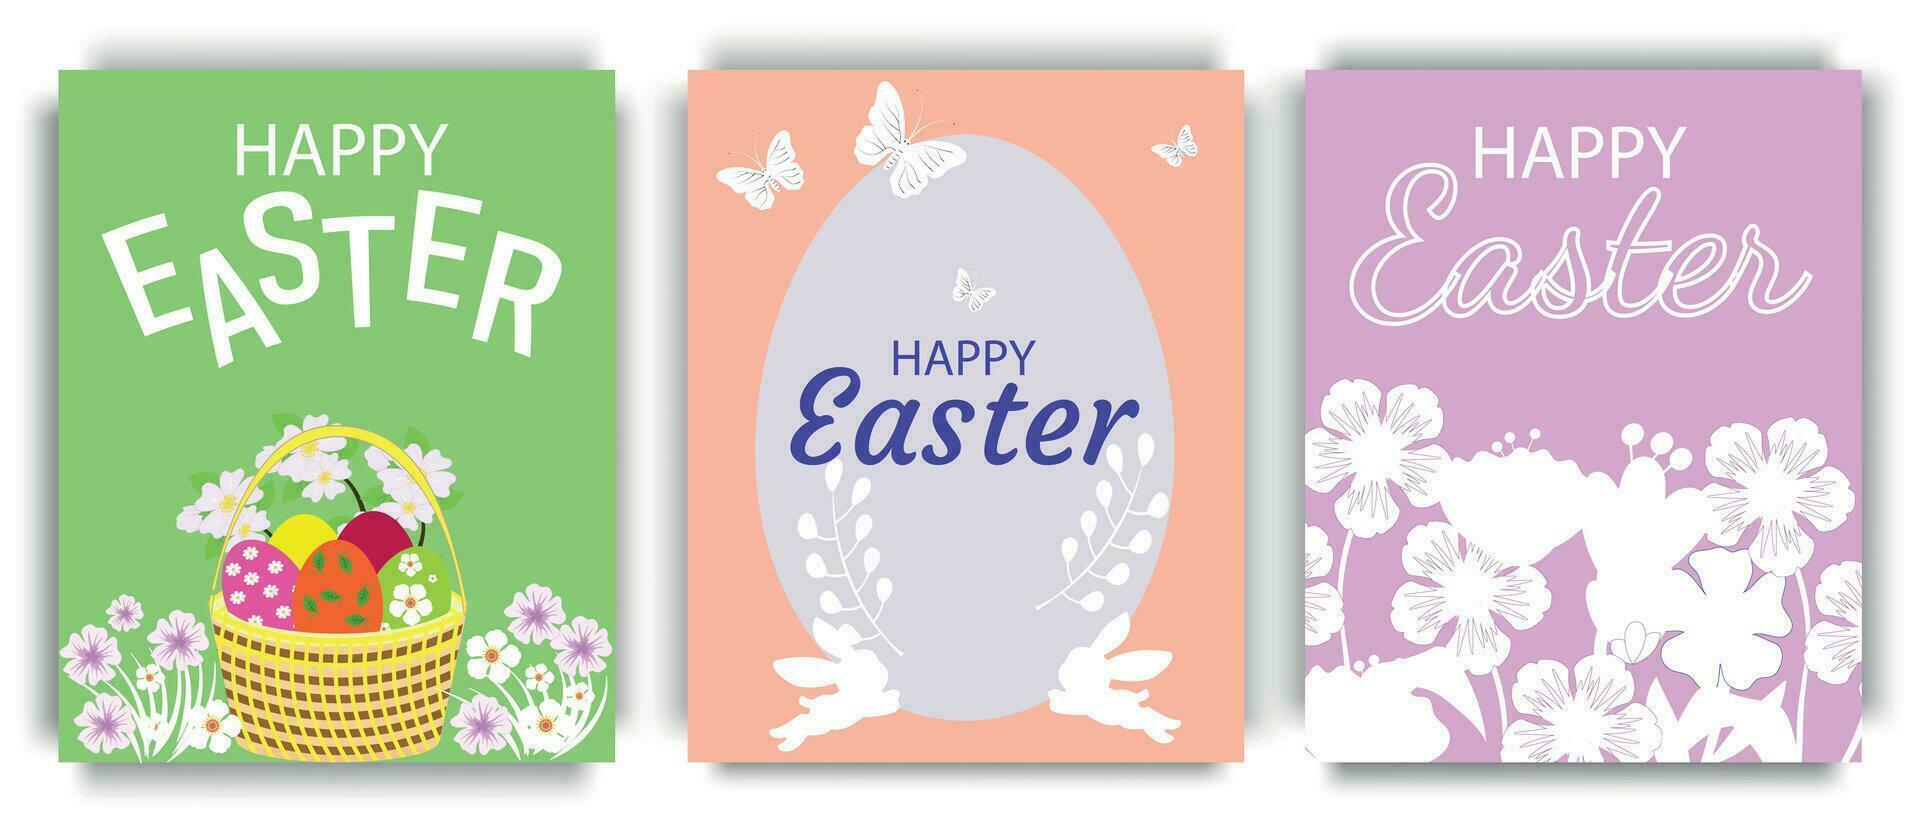 Set of Easter holiday vector posters. Happy Easter greetings with colorful floral pattern, bunny and butterflies. For holiday season cards collection design. Vector illustration.